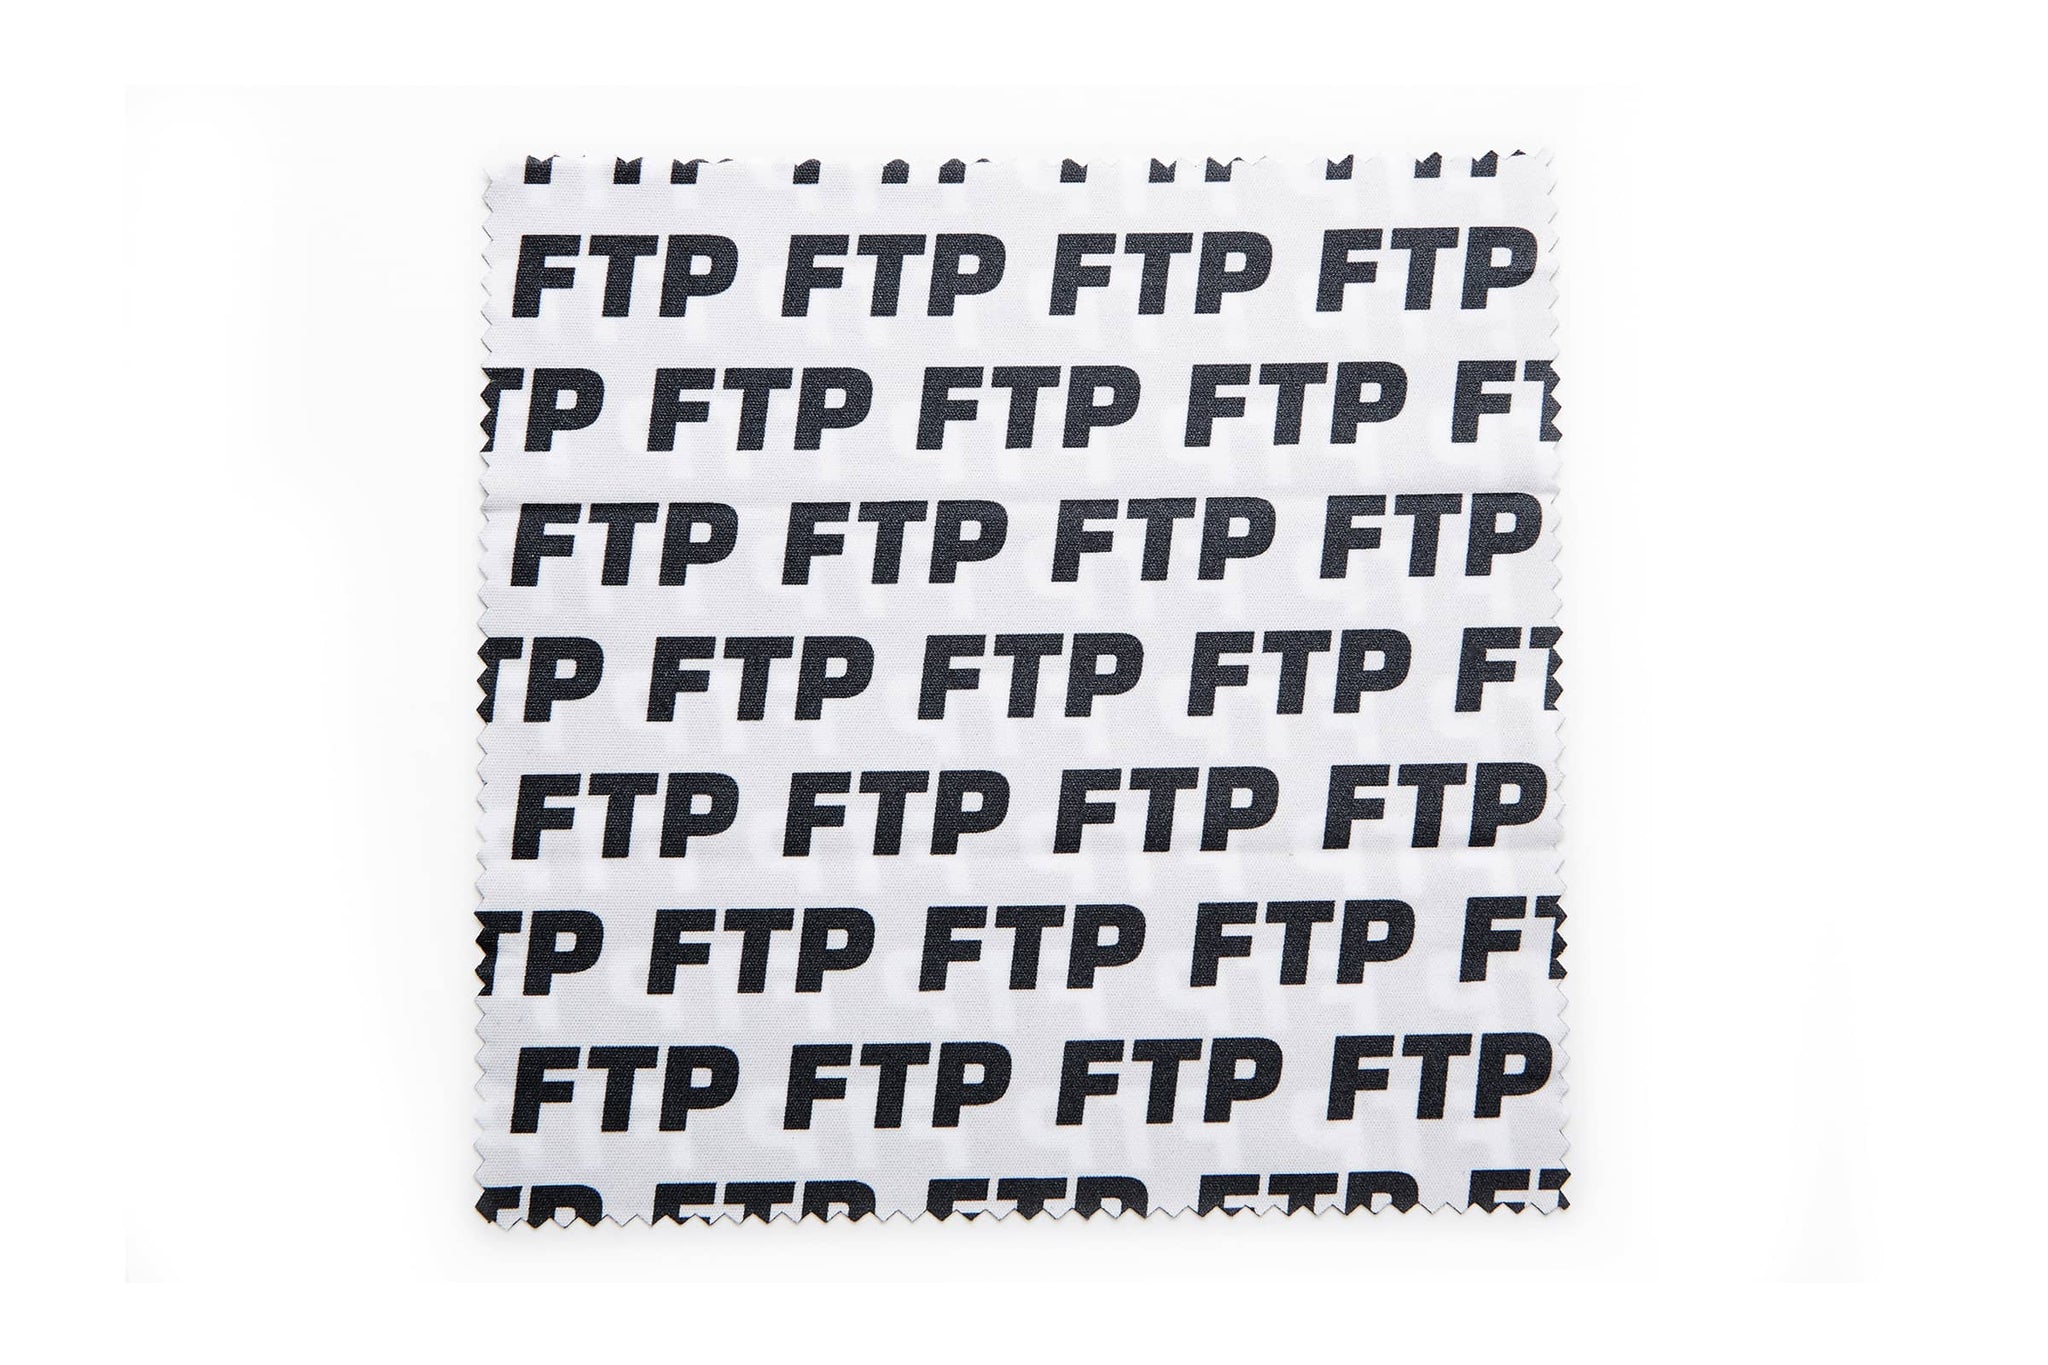 The FTP Sport - Silver